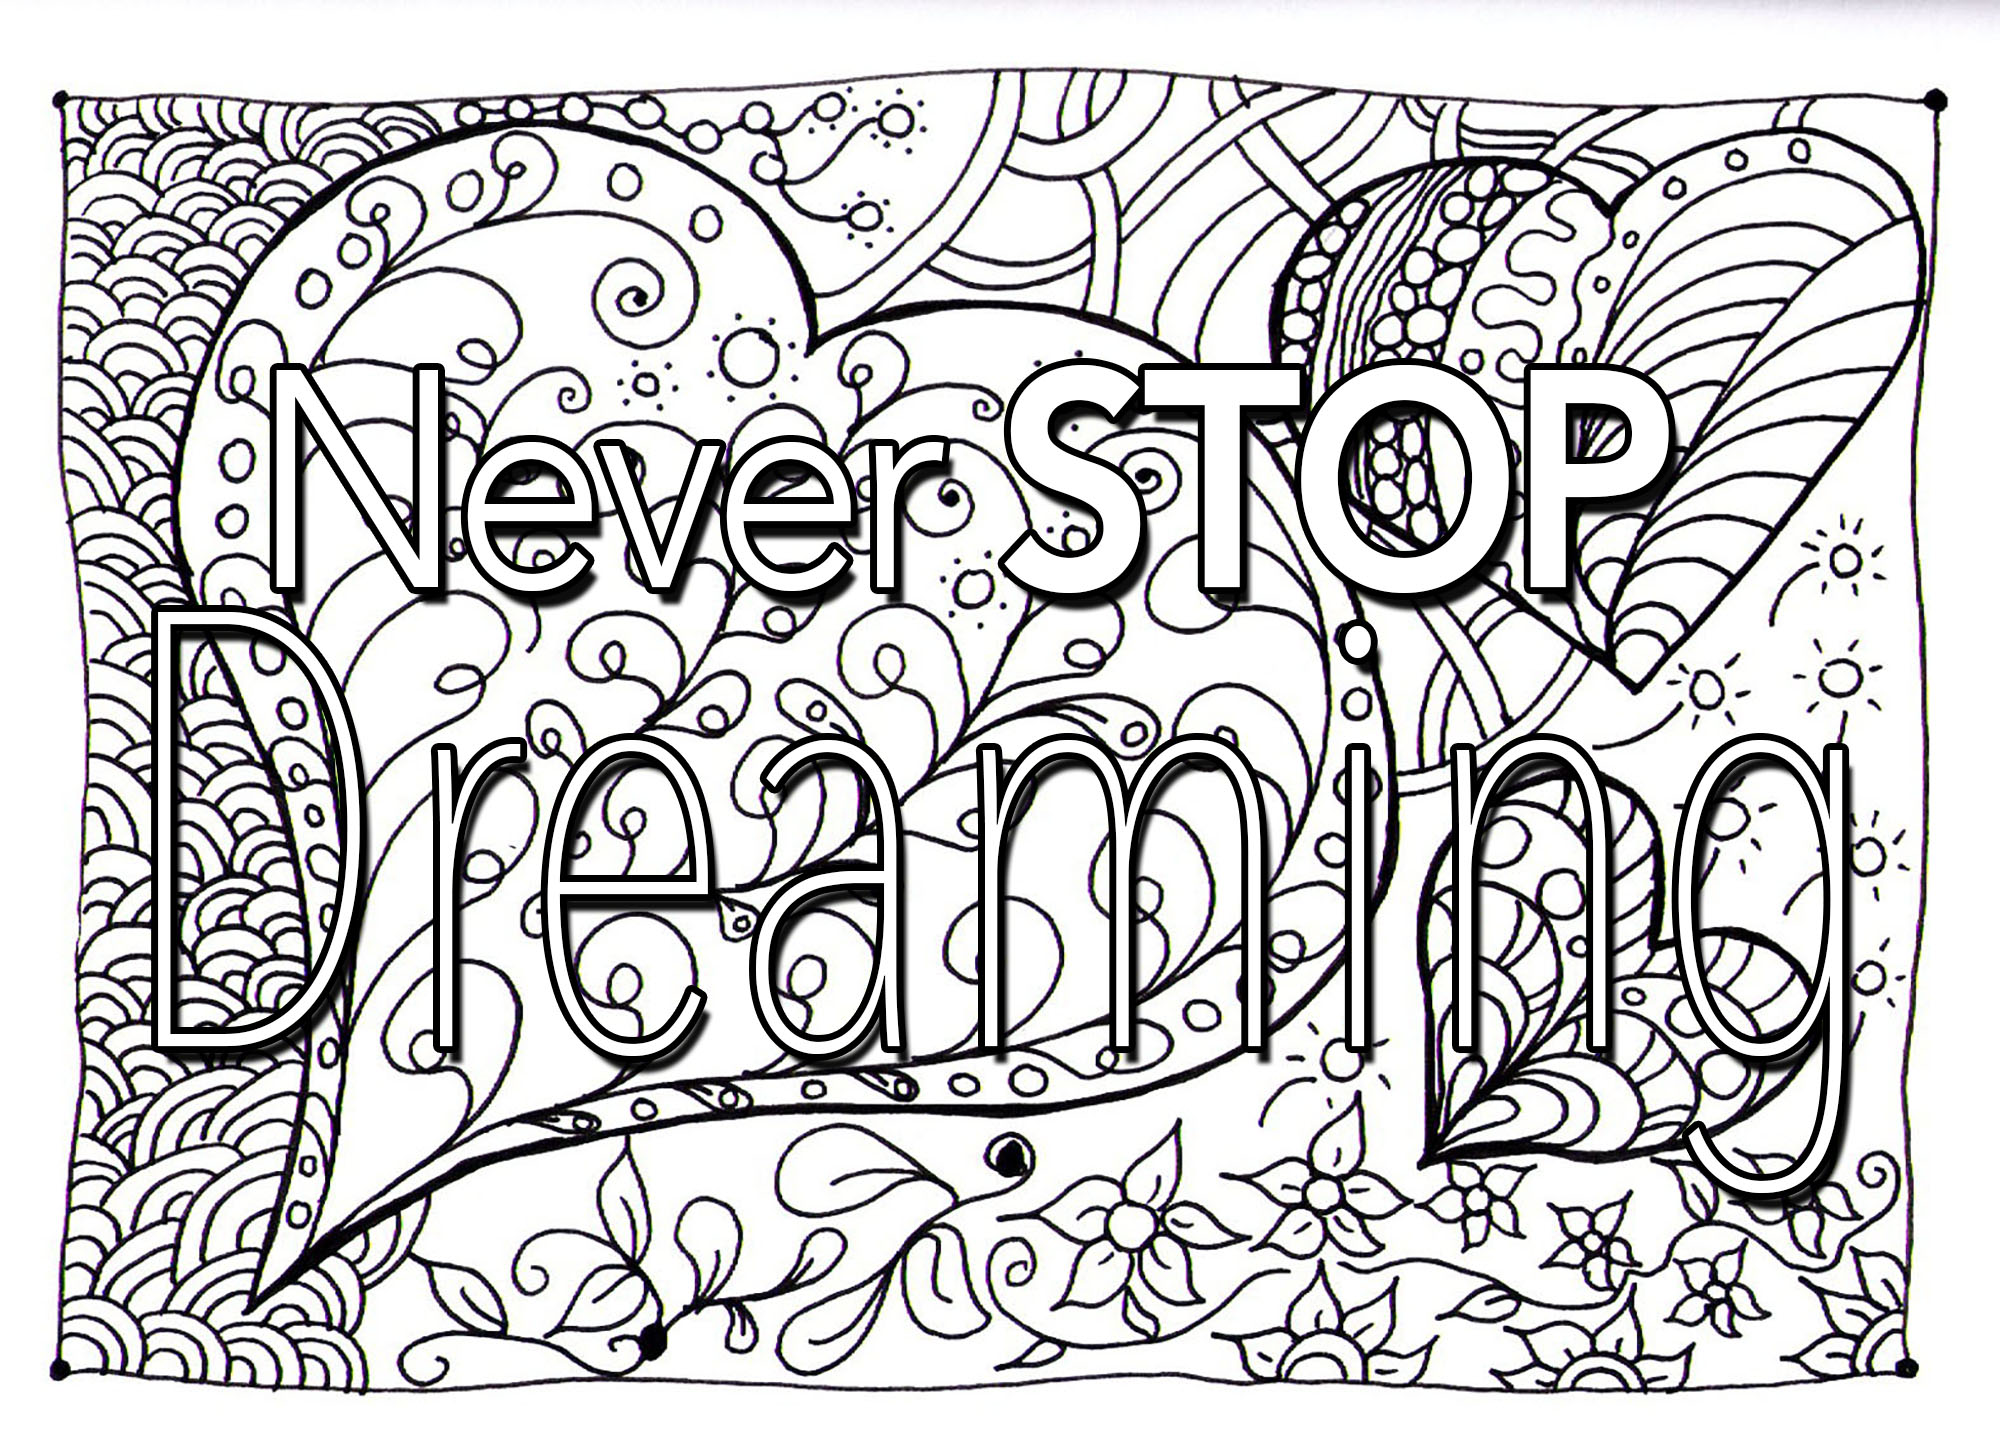 Quote never stop dreaming - Positive & inspiring quotes Adult ...